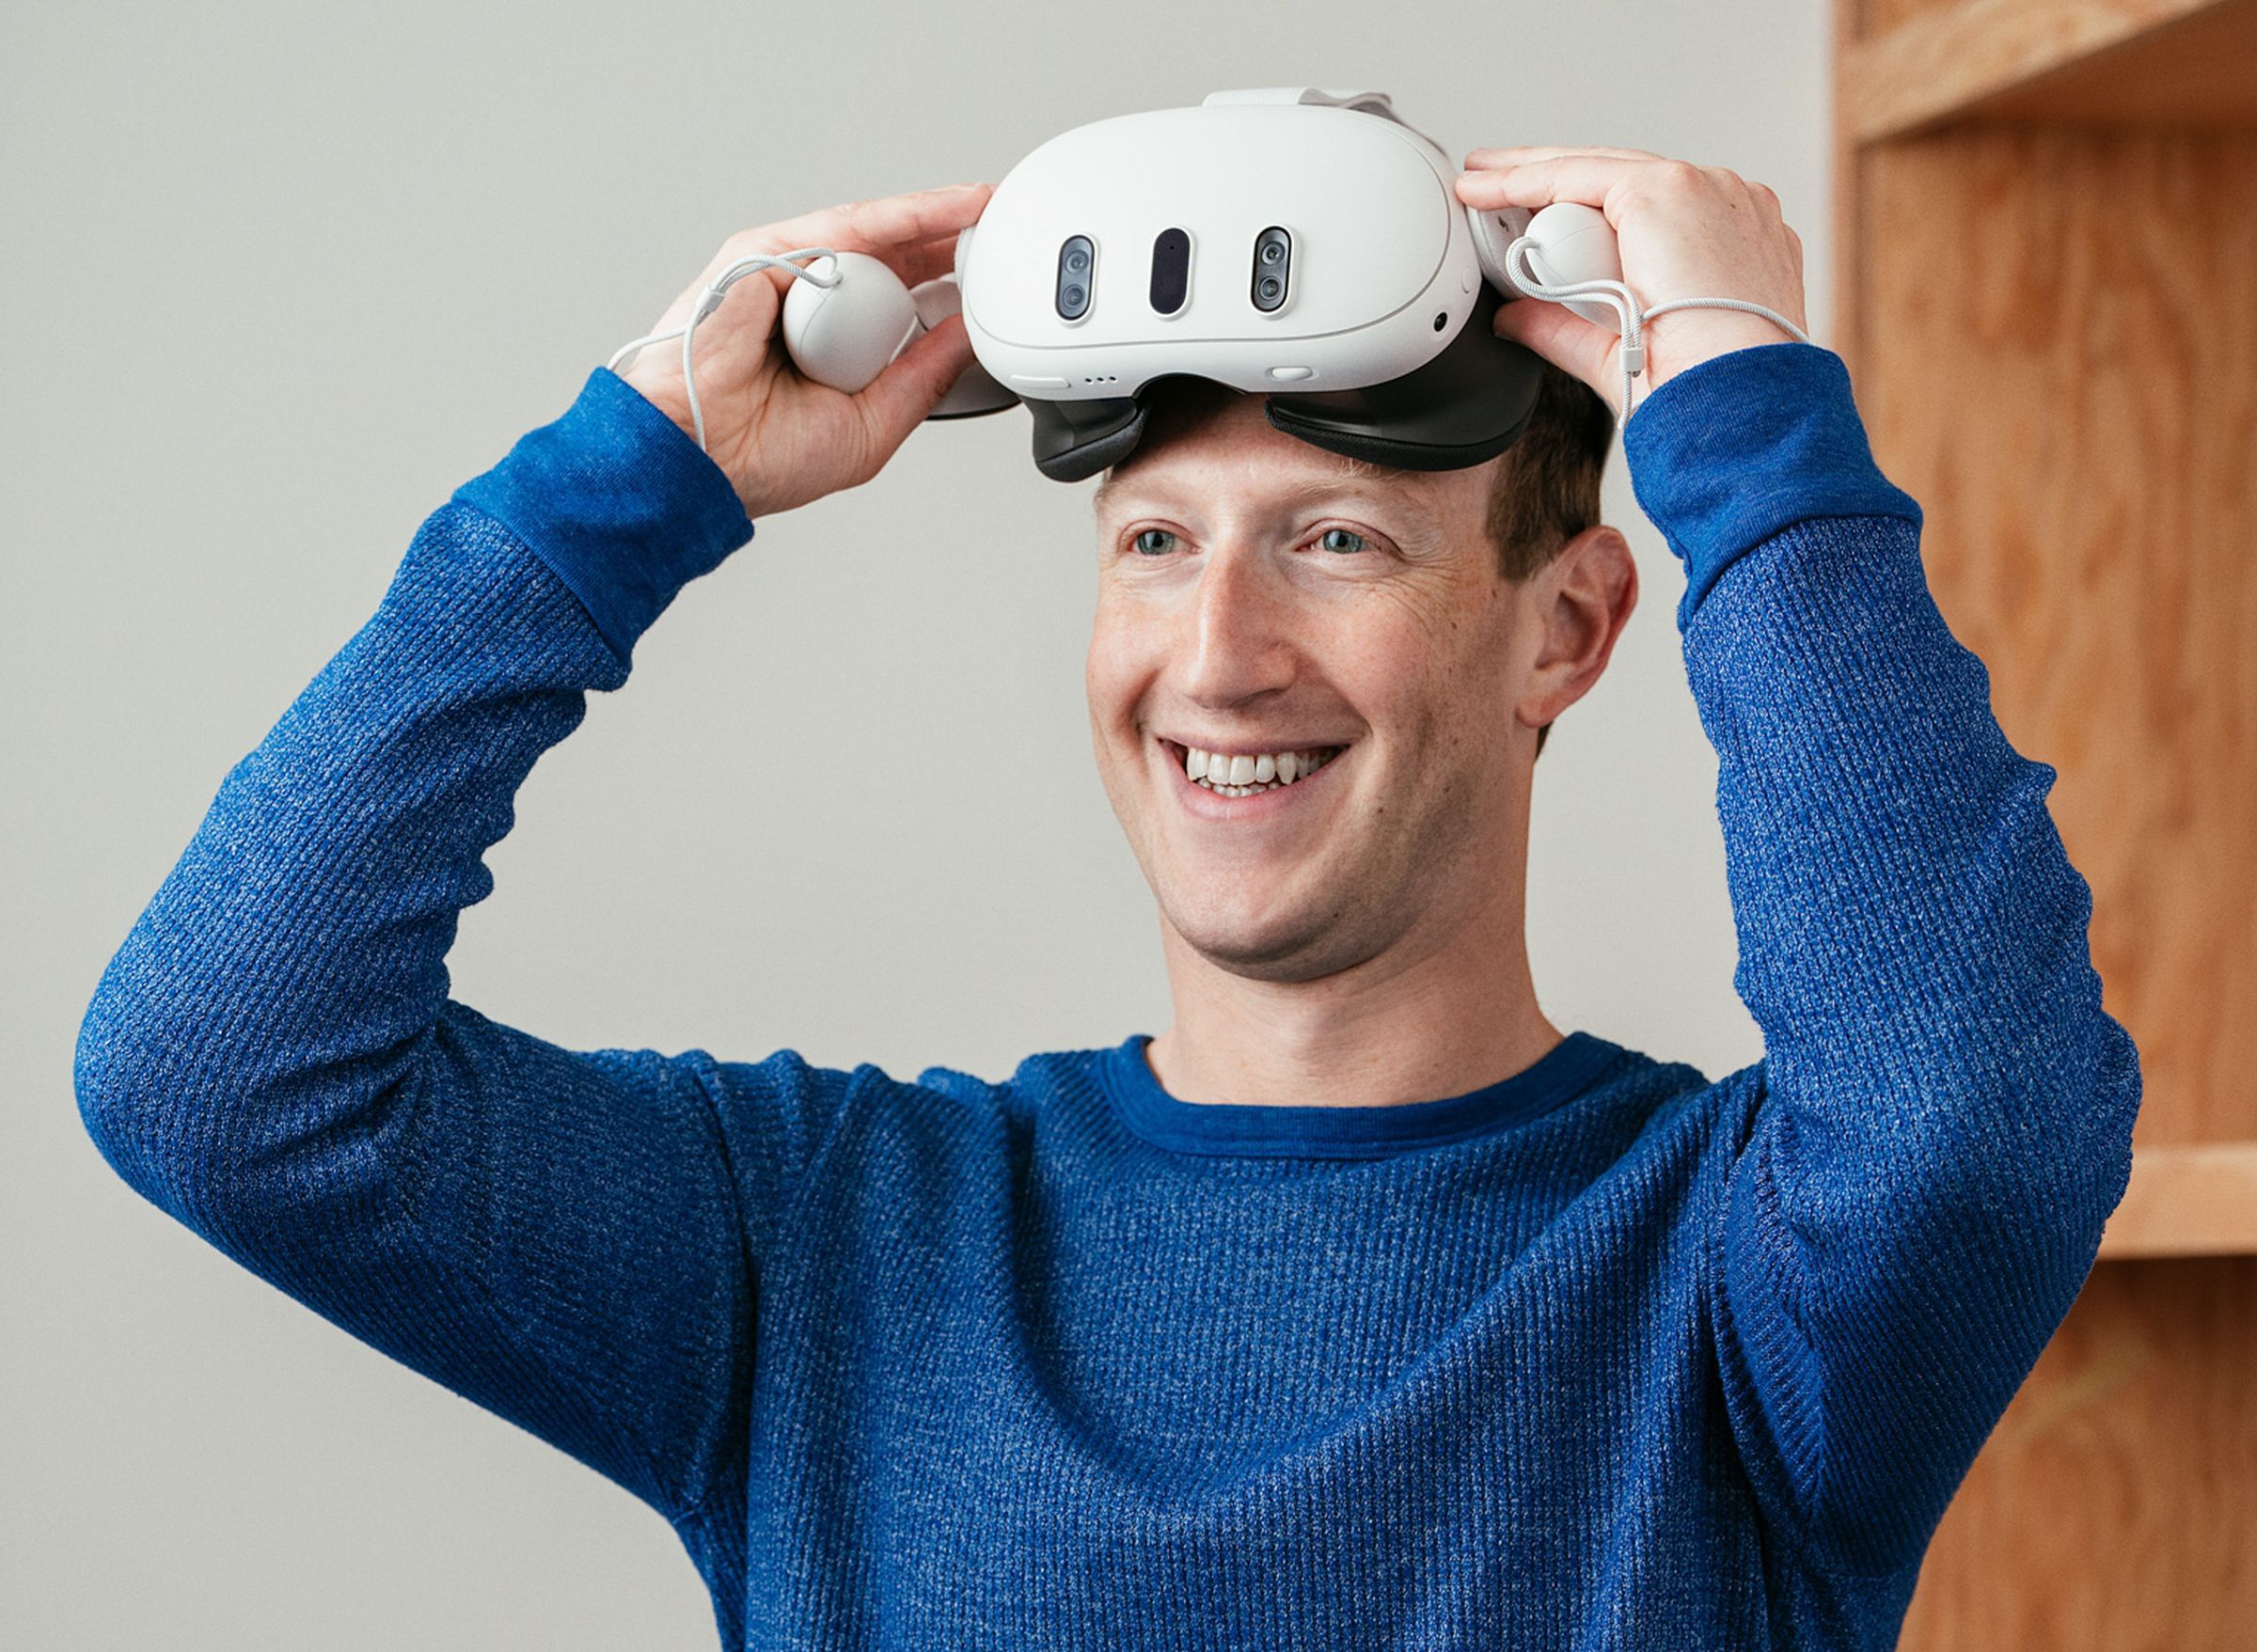 Here’s what Mark Zuckerberg thinks about Apple’s Vision Pro